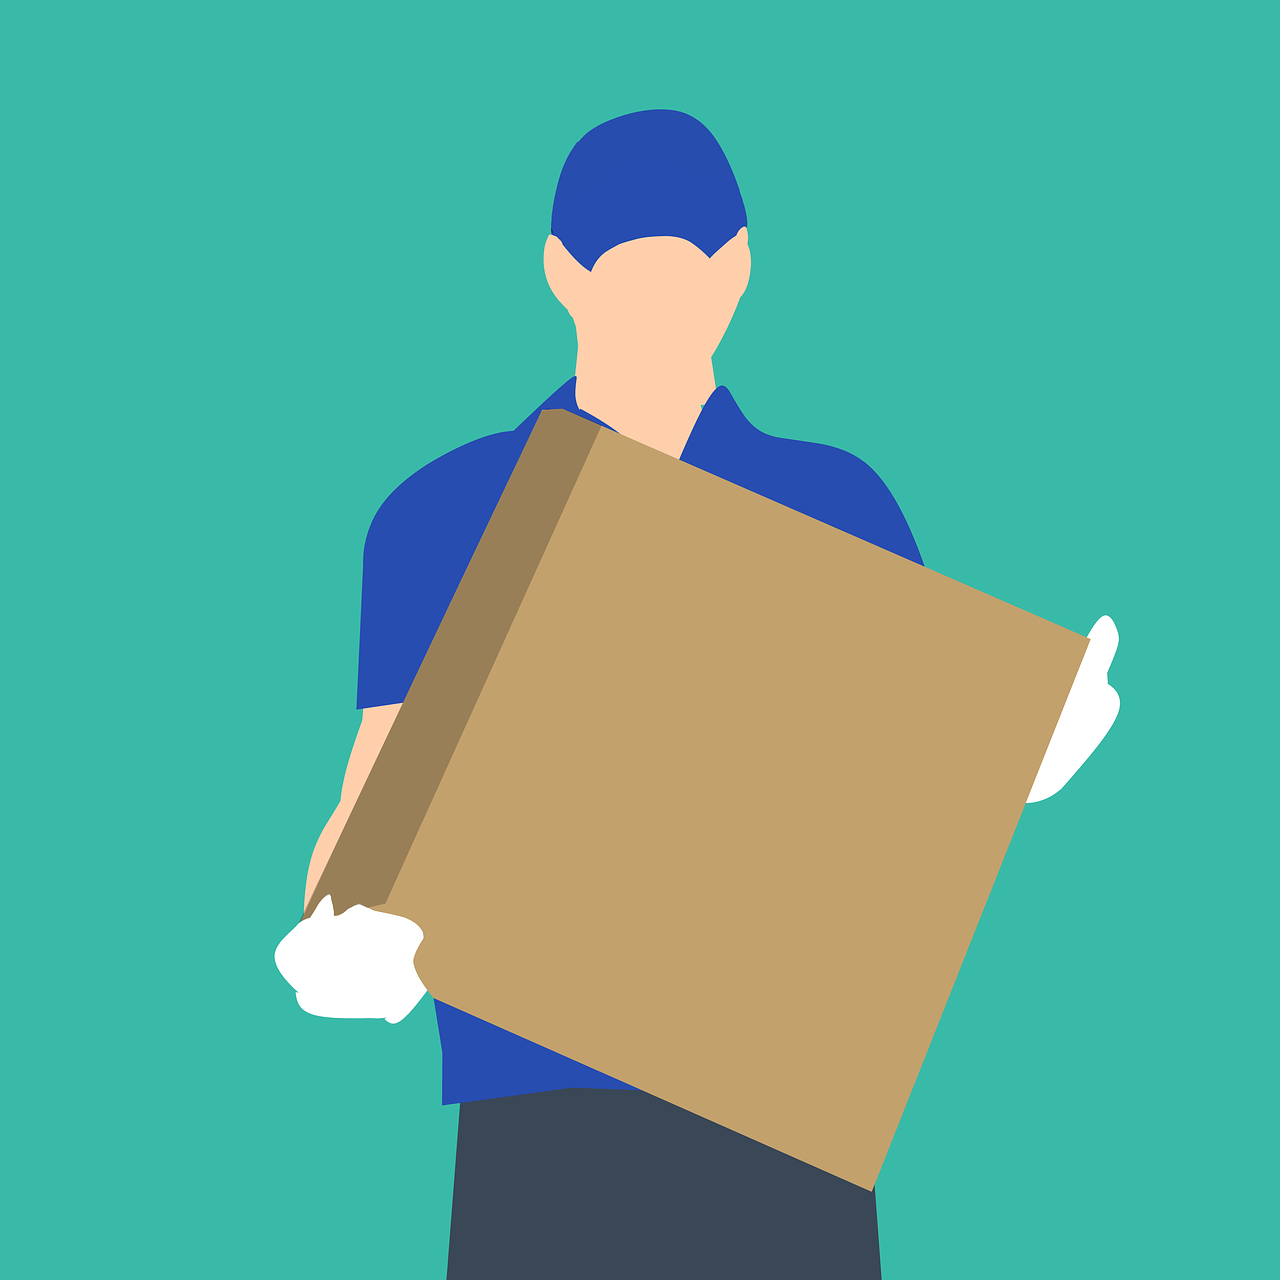 How will delivery processes change as workers return to the workplace?